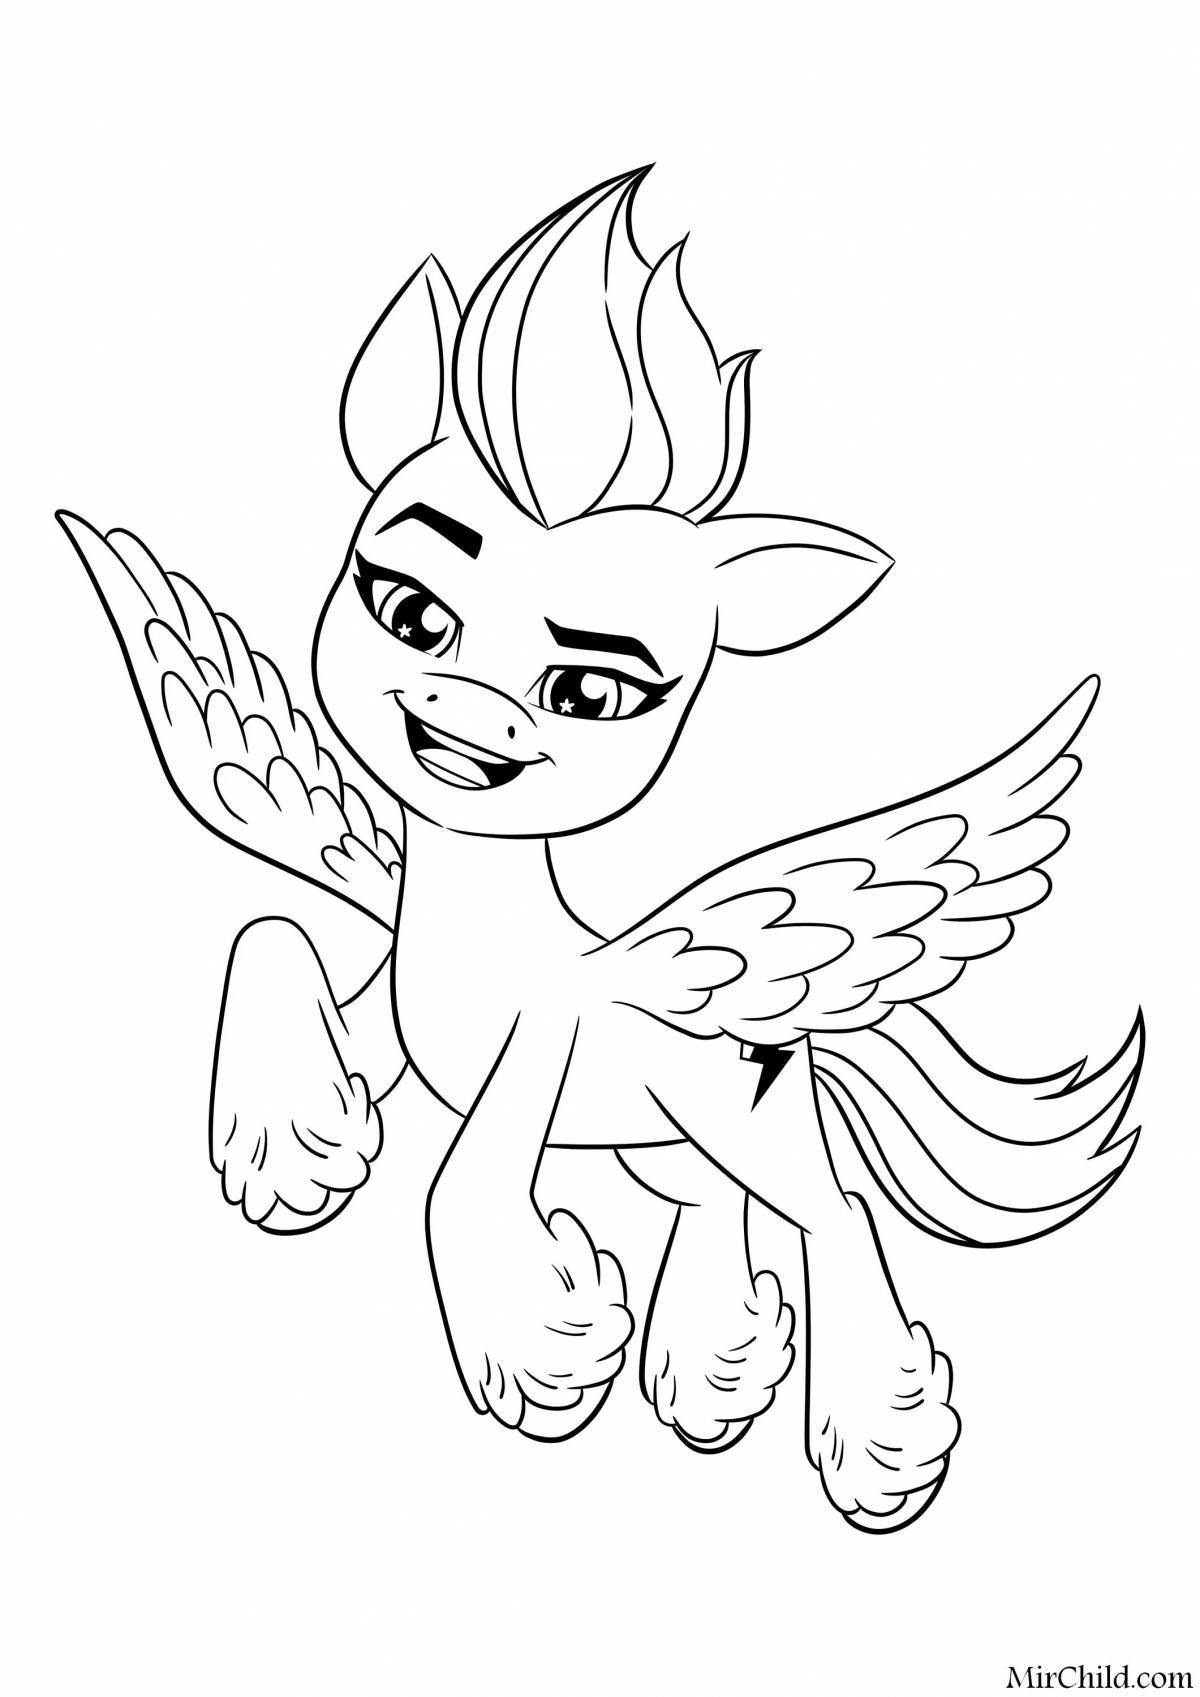 Sunny live pony coloring